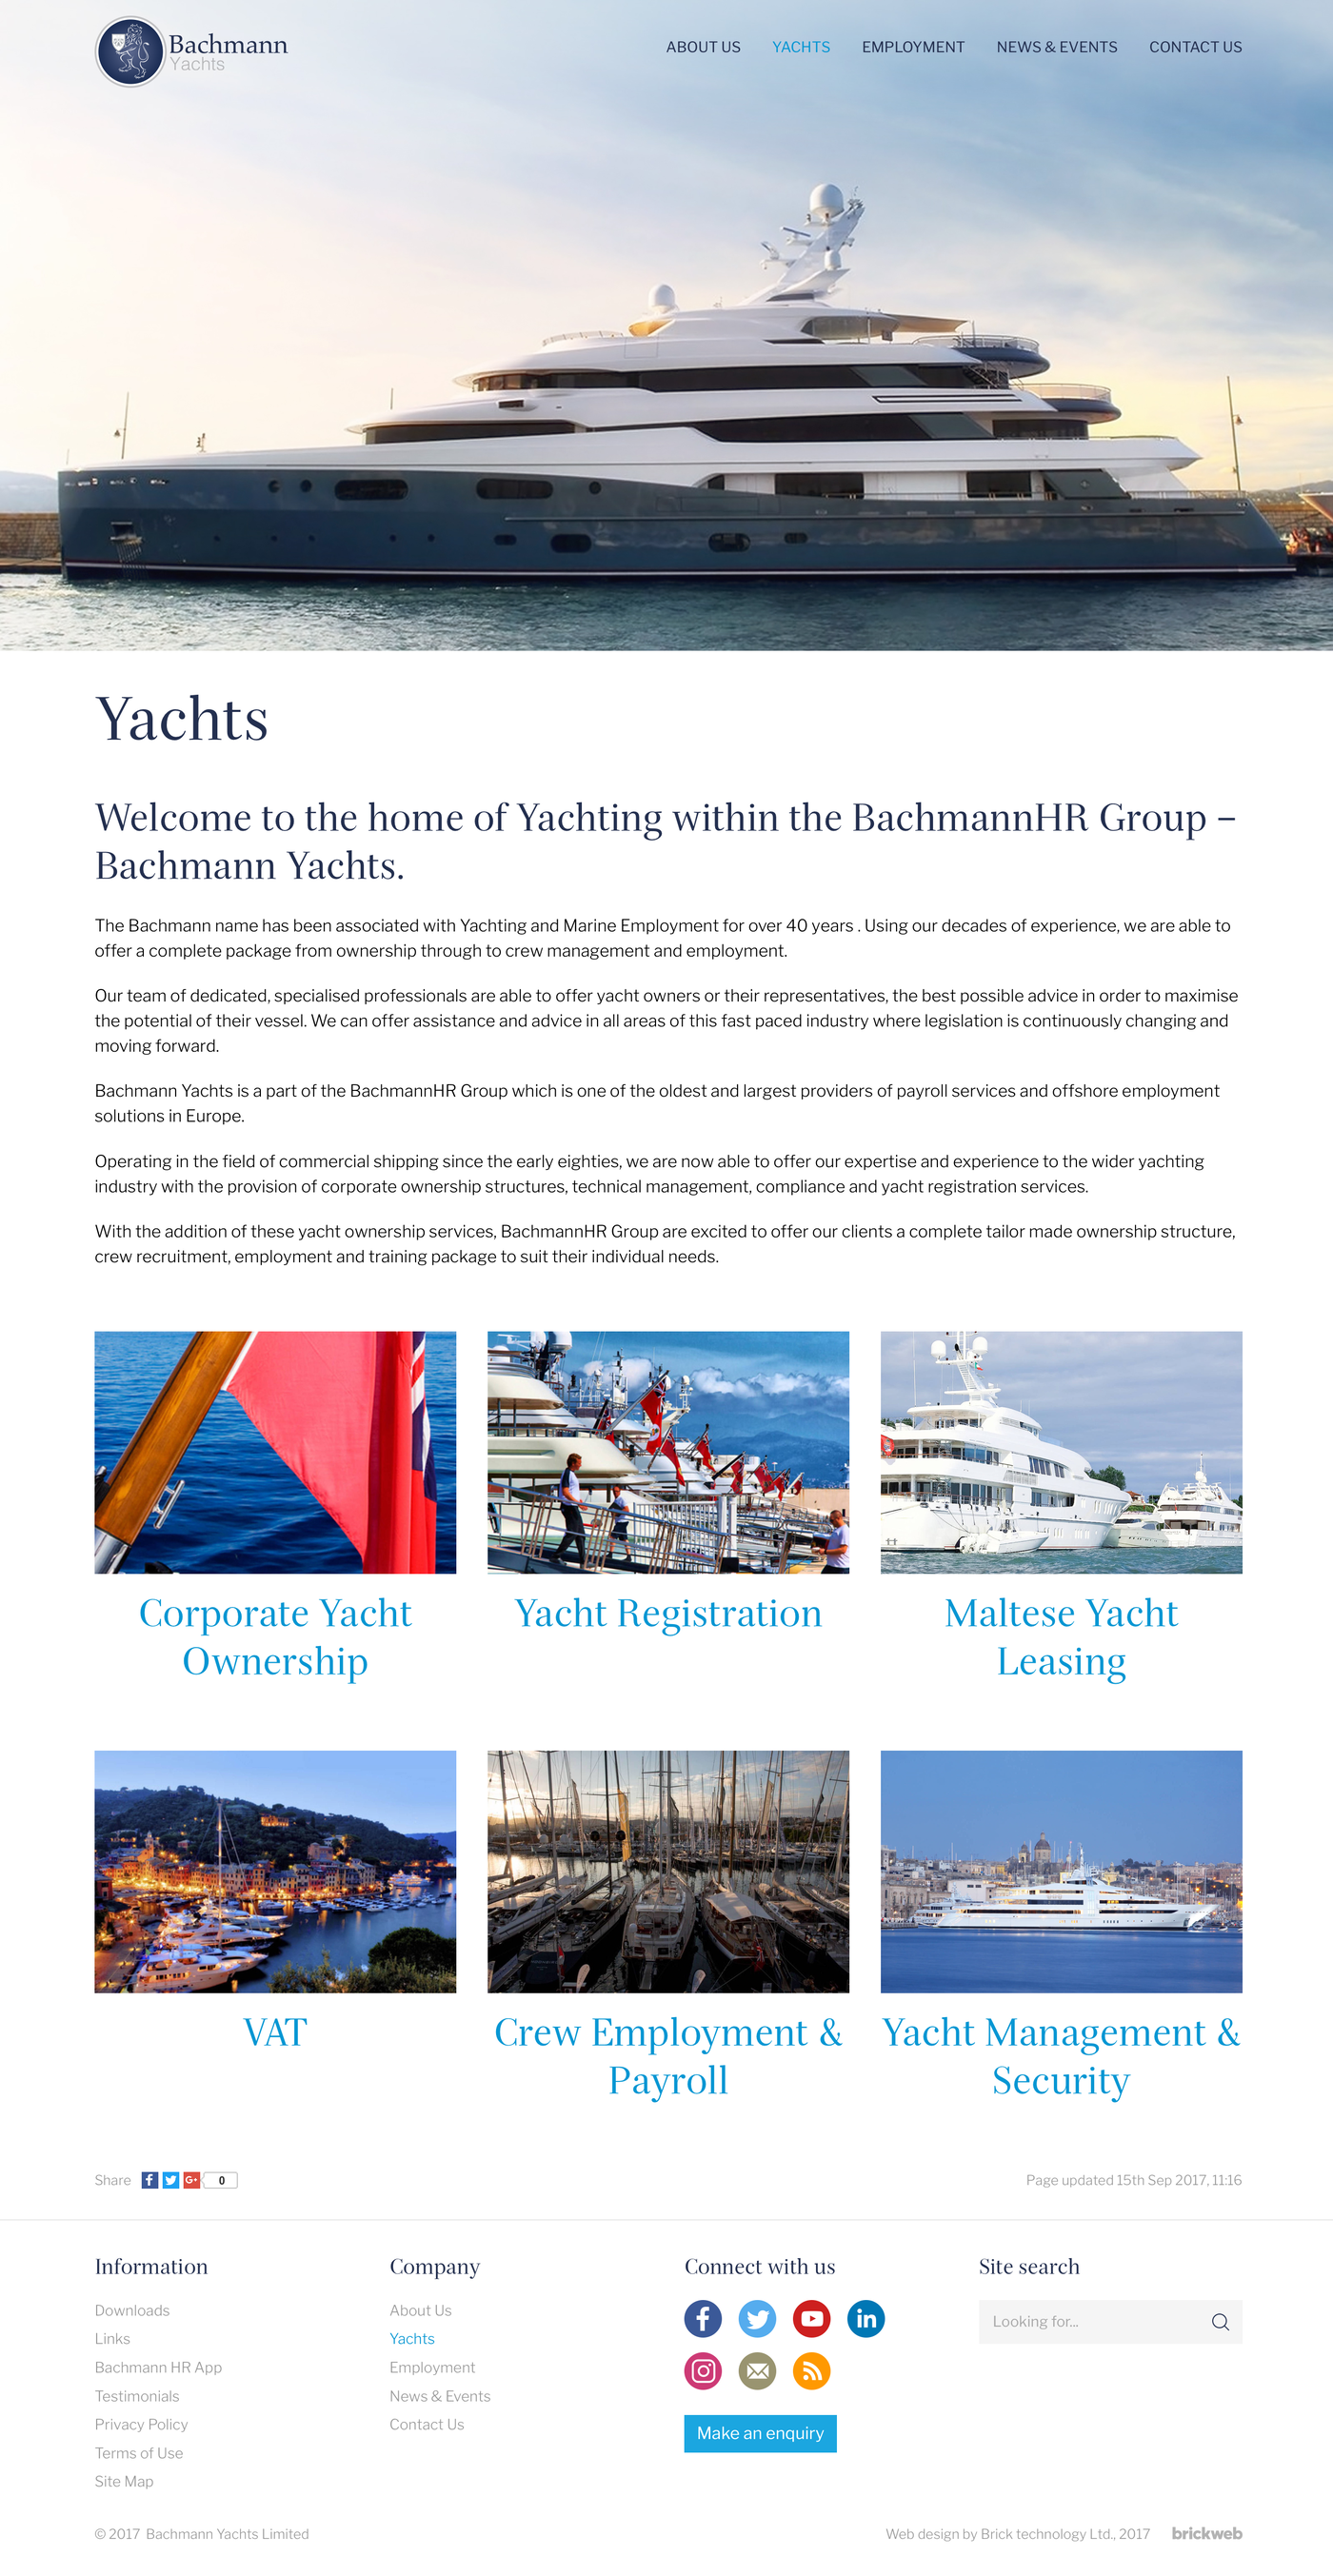 Bachmann Yachts Content page